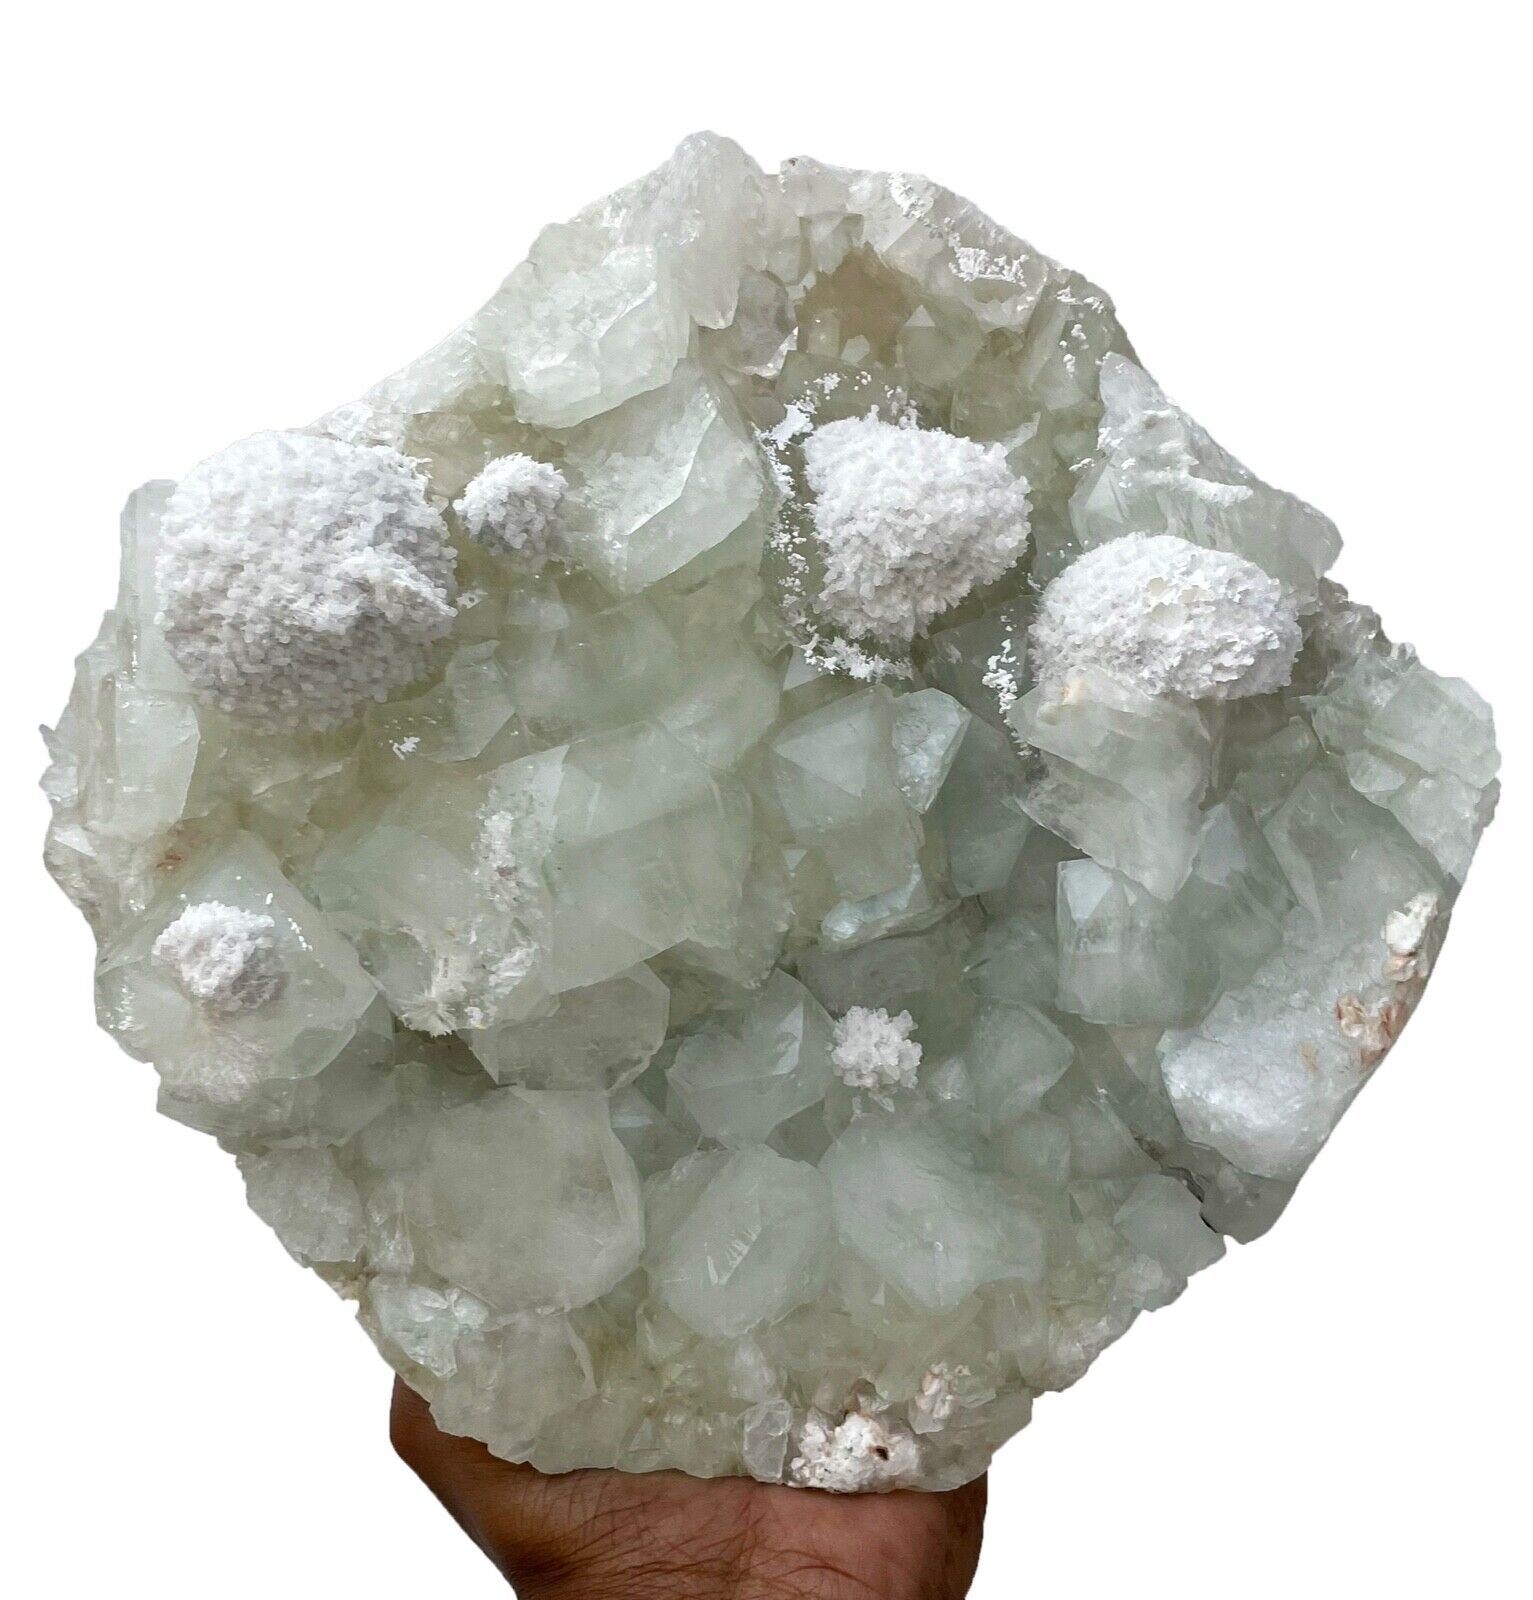 Self Standing Mordenite Ball On Apophyllite Rocks Crystals And Mineral Specimens